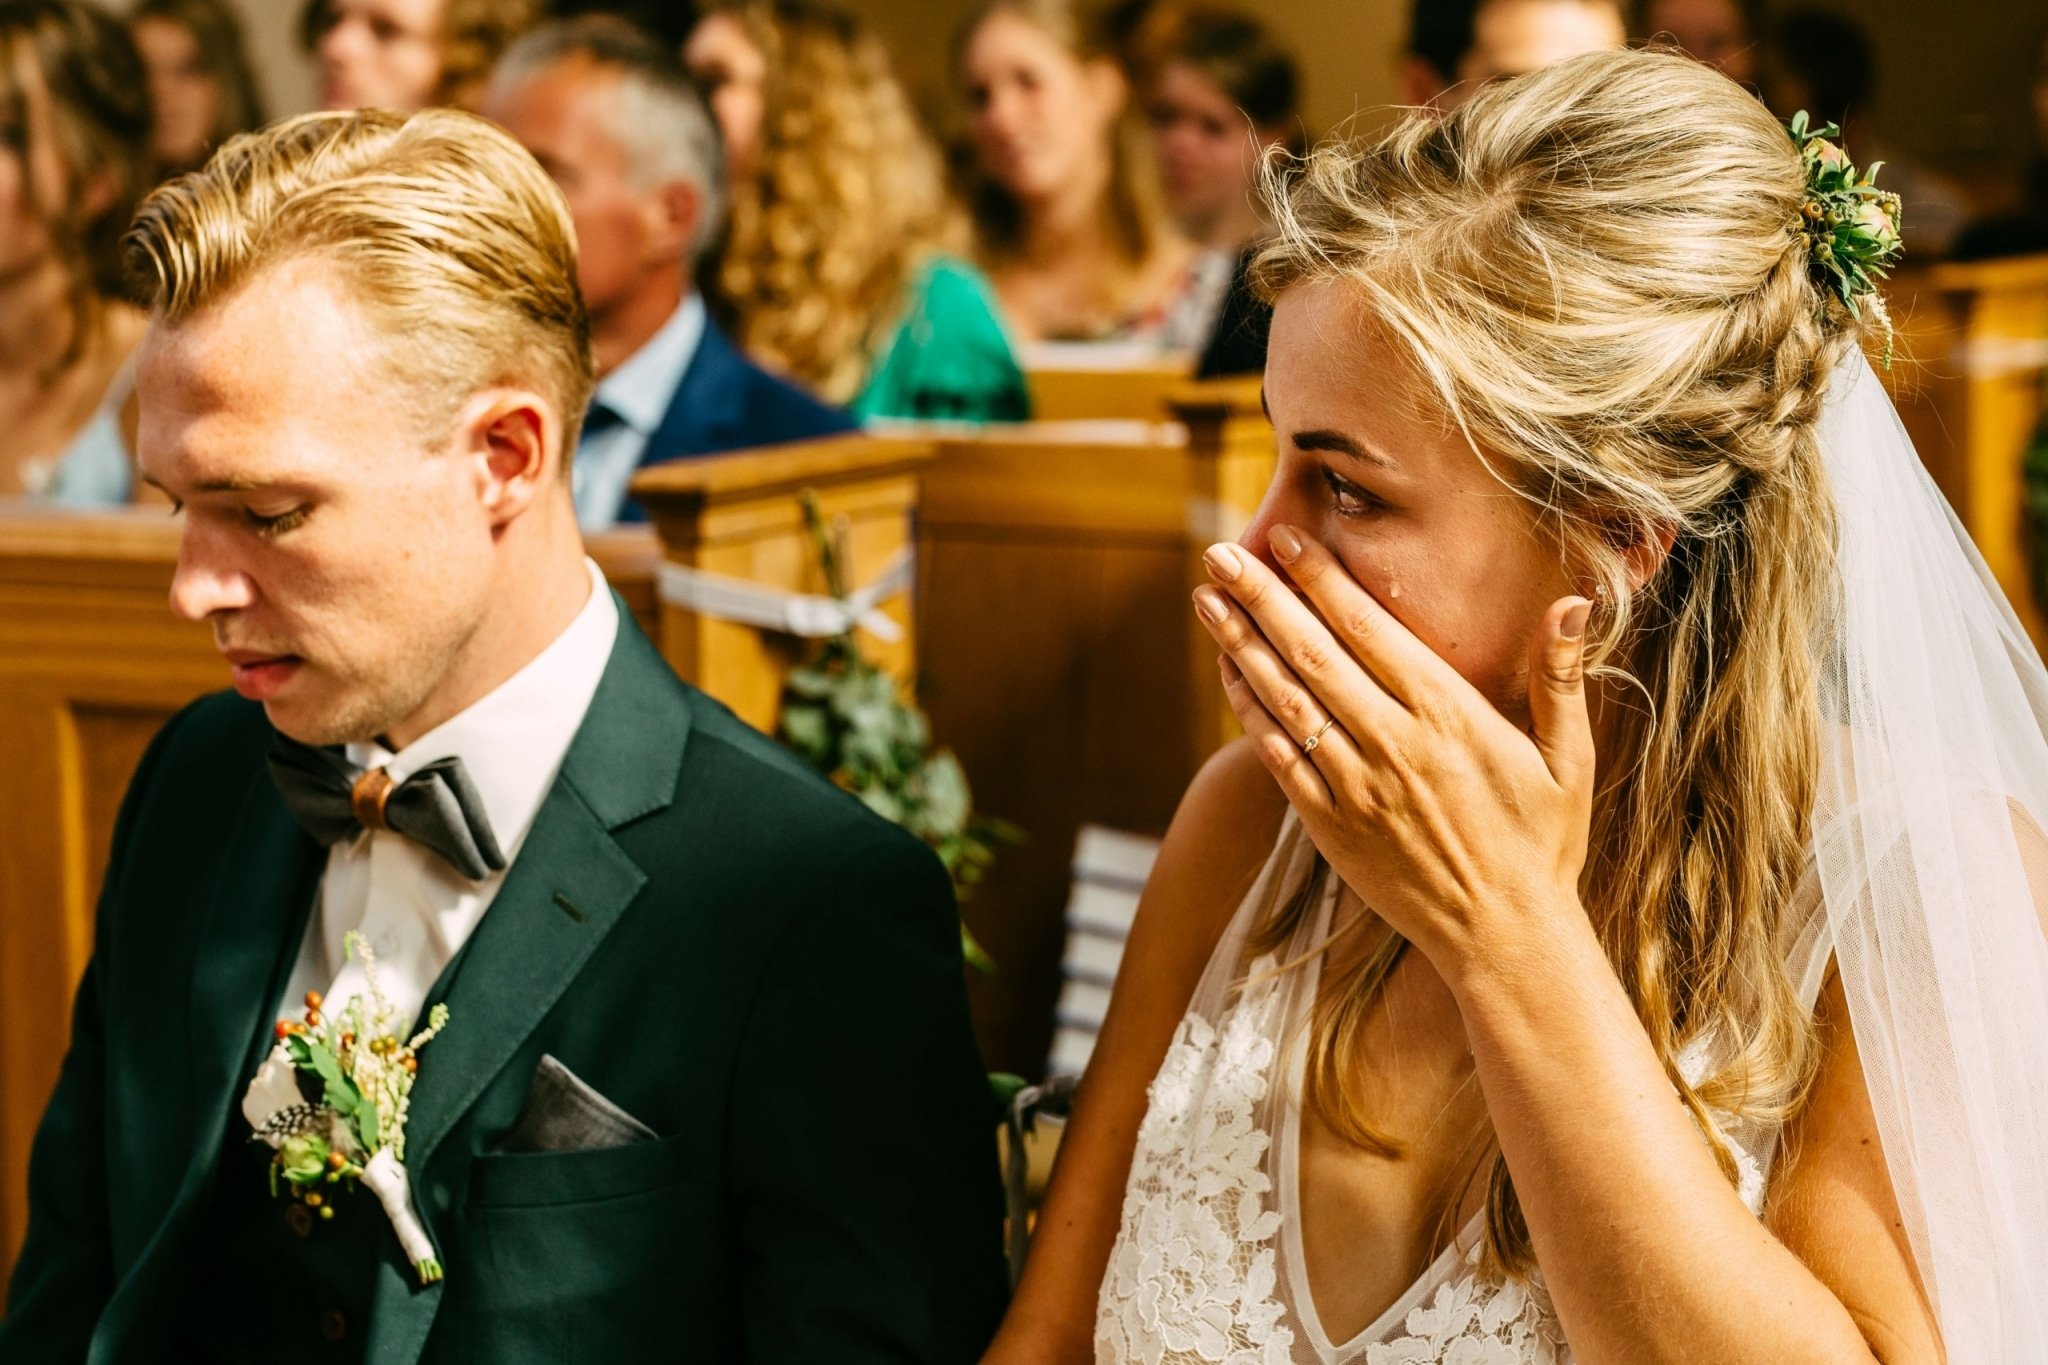 A bride and groom cry during their wedding ceremony.